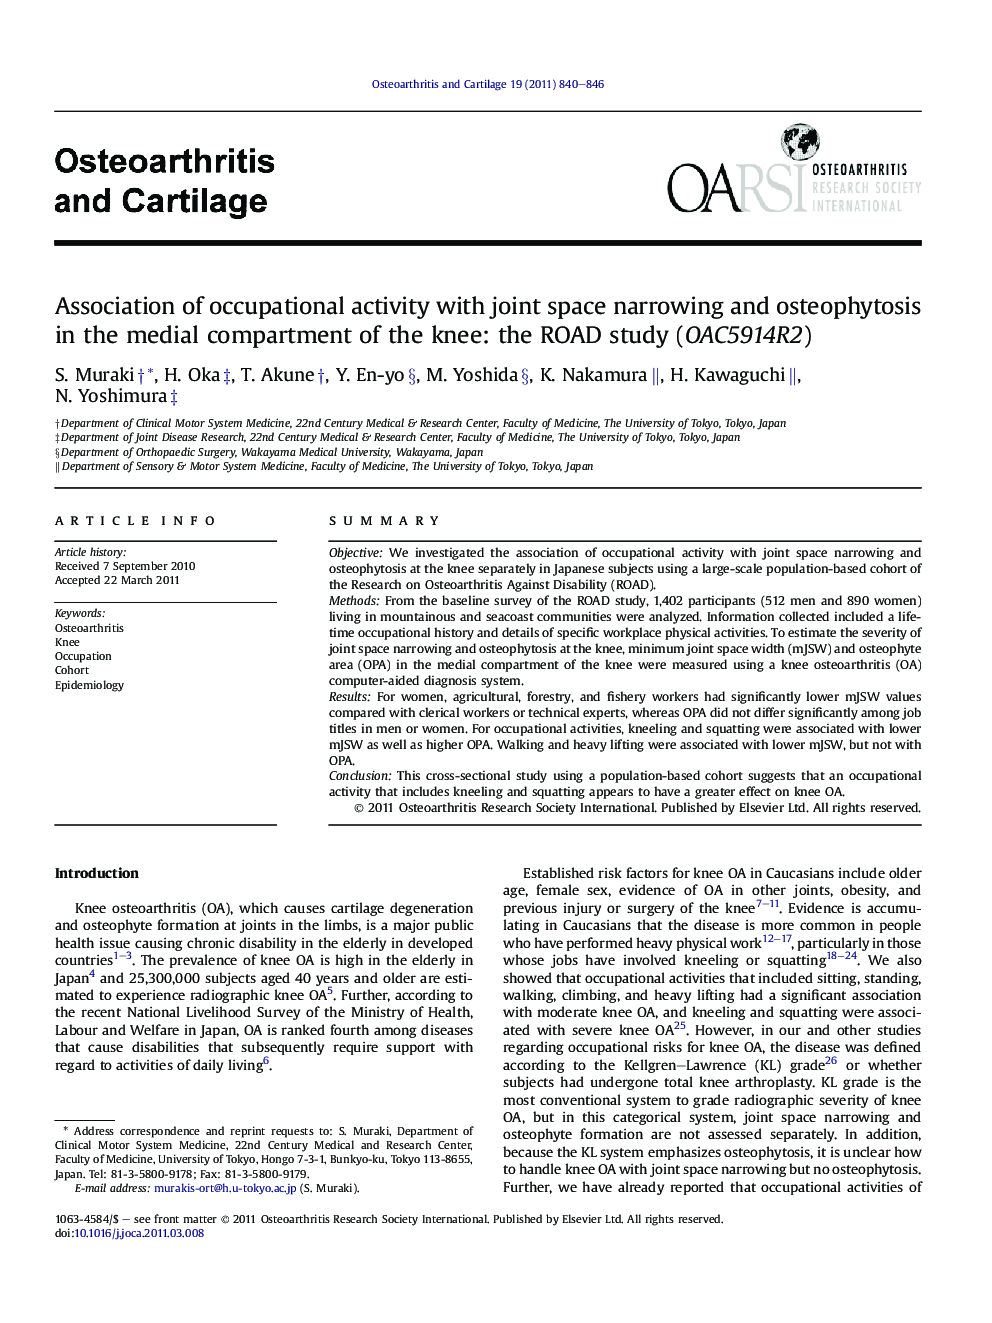 Association of occupational activity with joint space narrowing and osteophytosis in the medial compartment of the knee: the ROAD study (OAC5914R2)